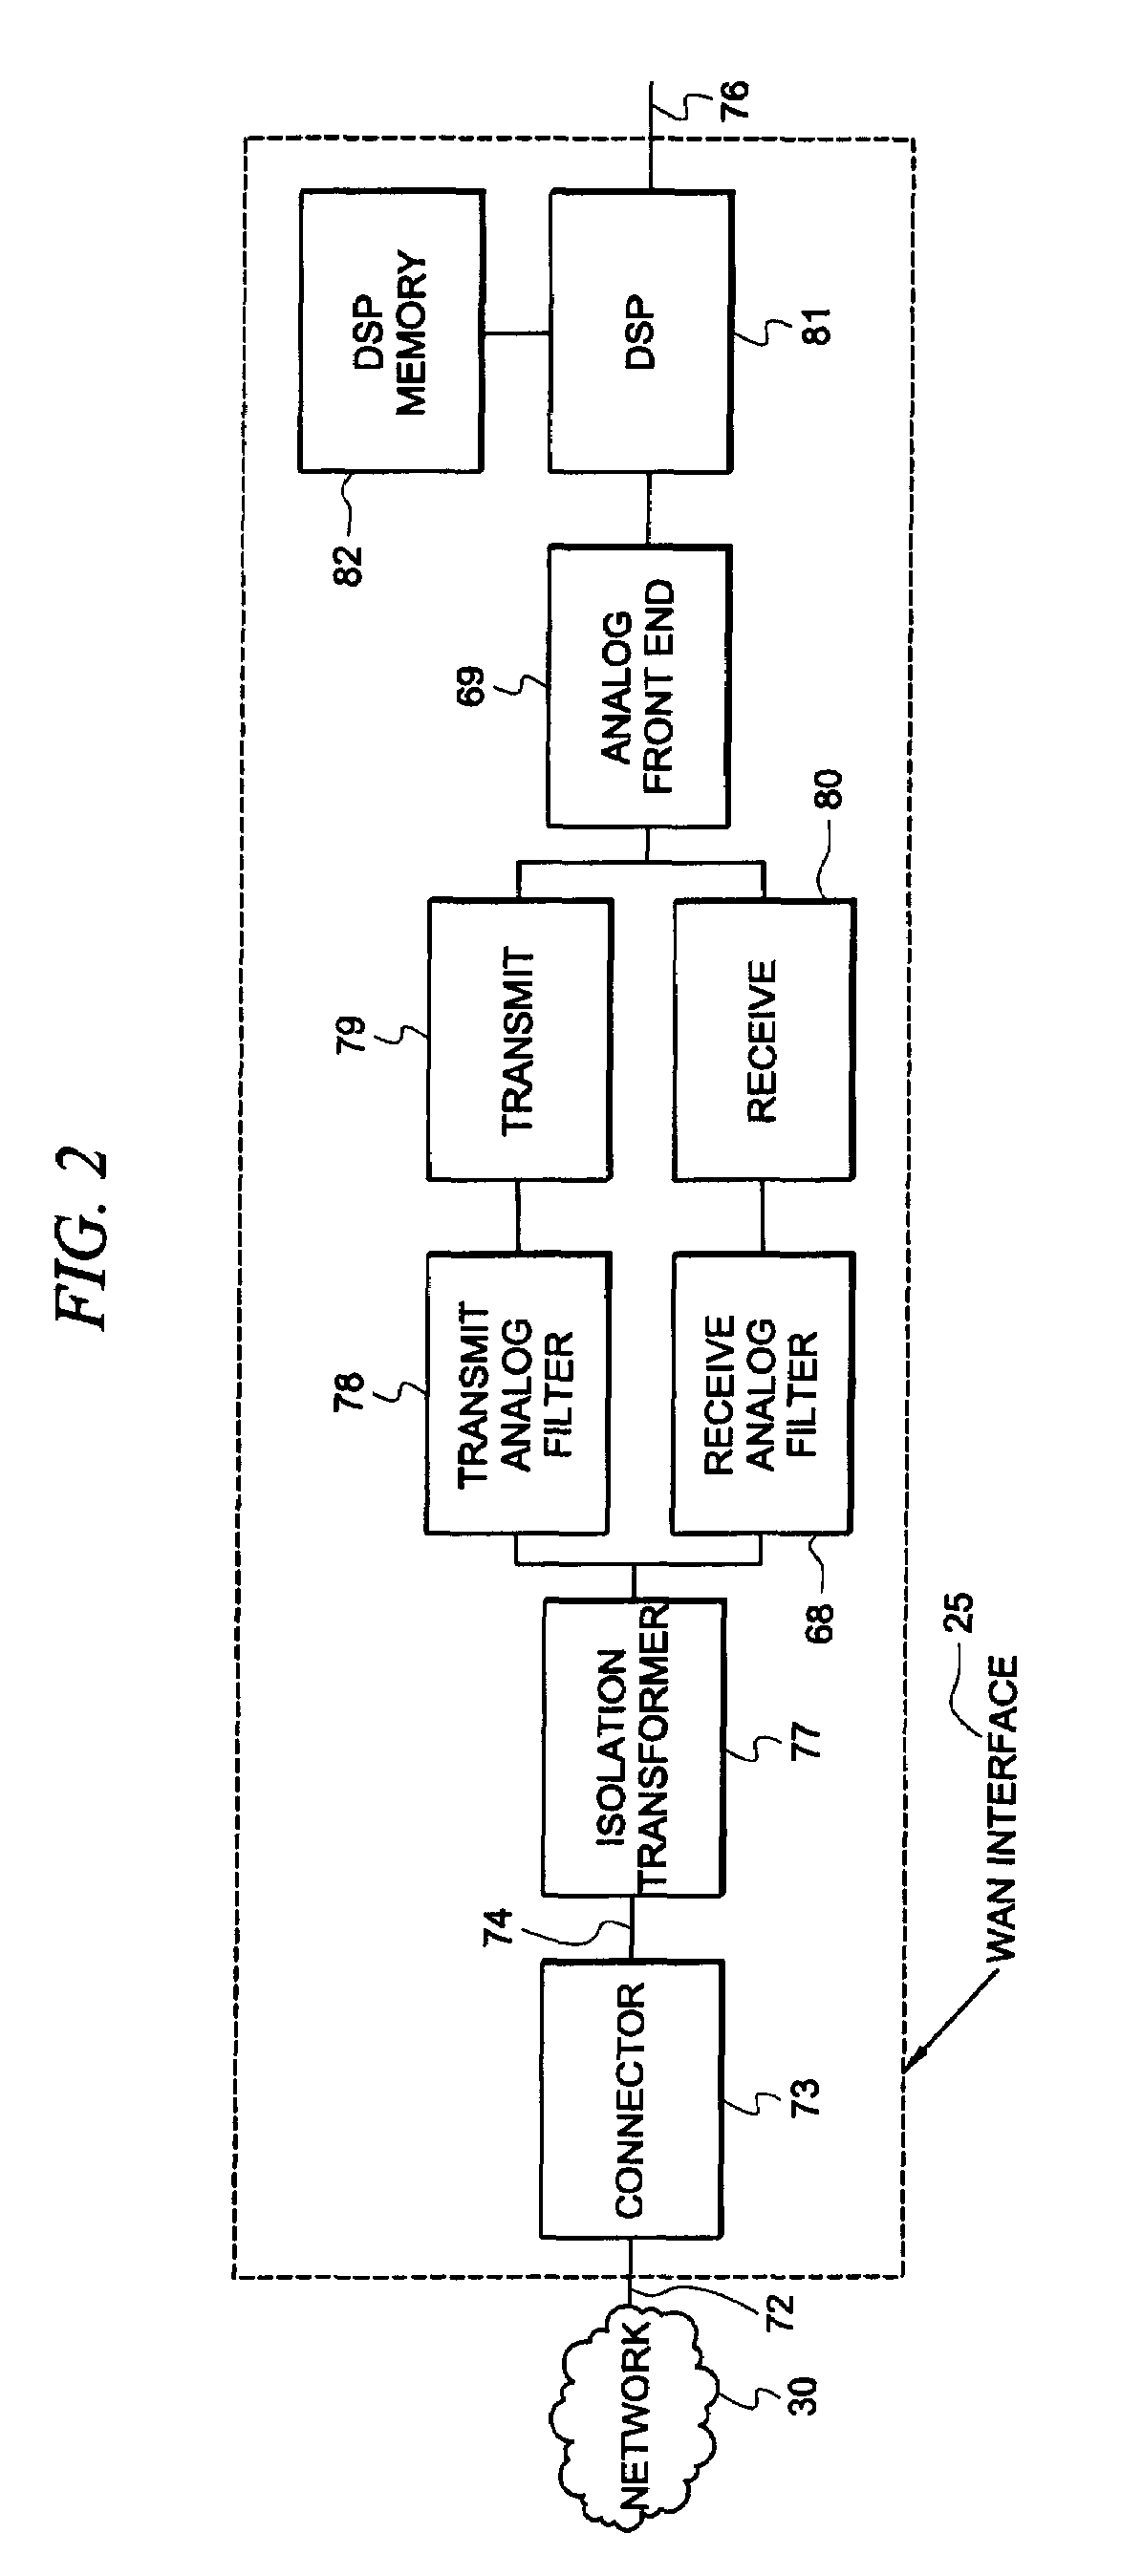 Method and apparatus for determining and reporting the operational status of an integrated services hub